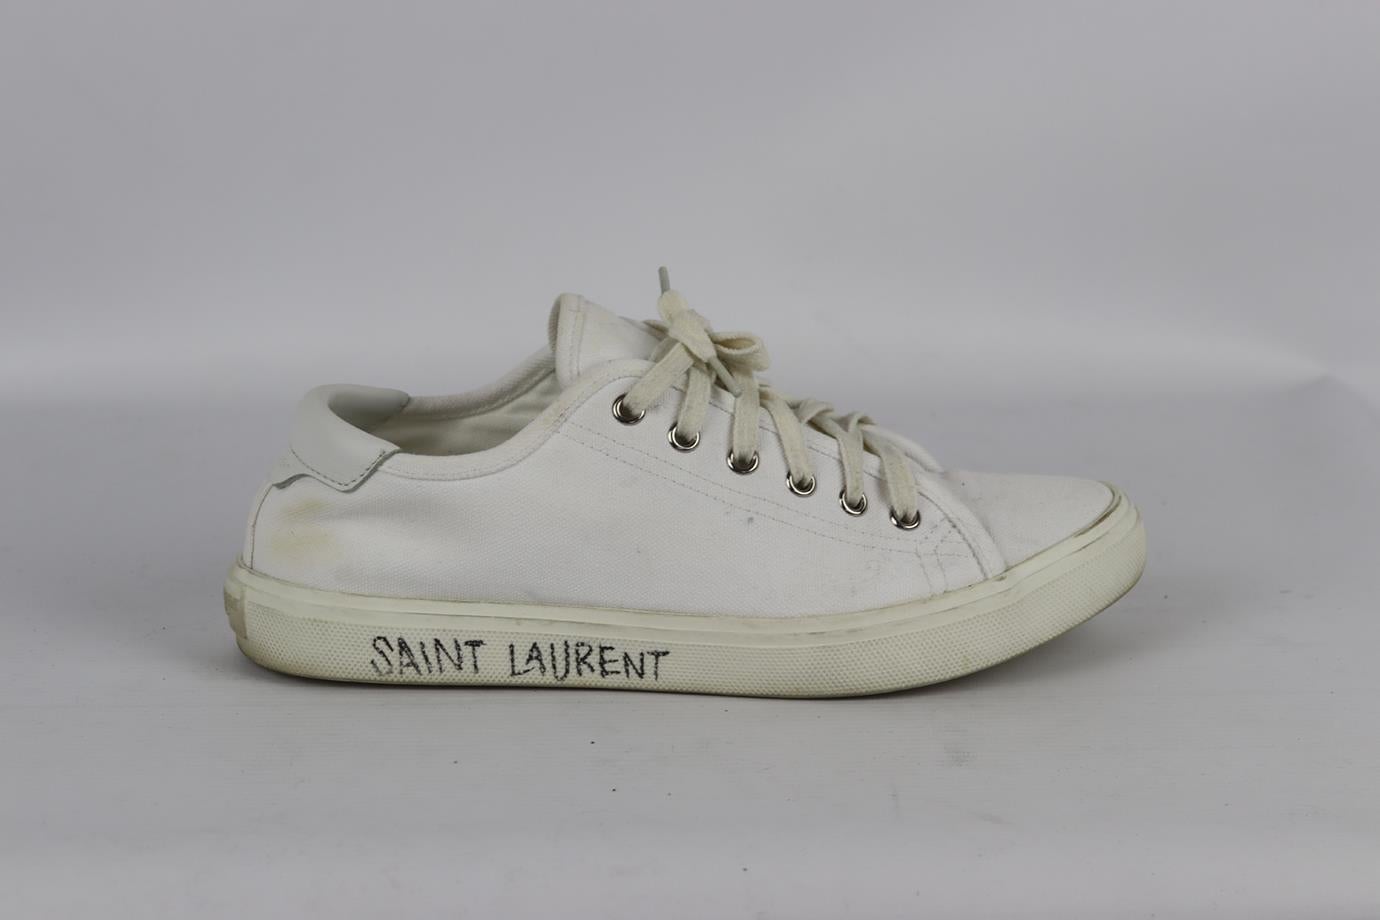 Saint Laurent logo detailed canvas sneakers. White. Lace up fastening at front. Does not come with dustbag or box. Size: EU 38.5 (UK 5.5, US 8.5). Insole: 9.6 in. Heel Height: 1 in. Very good condition - Some wear to soles. Light wear to upper